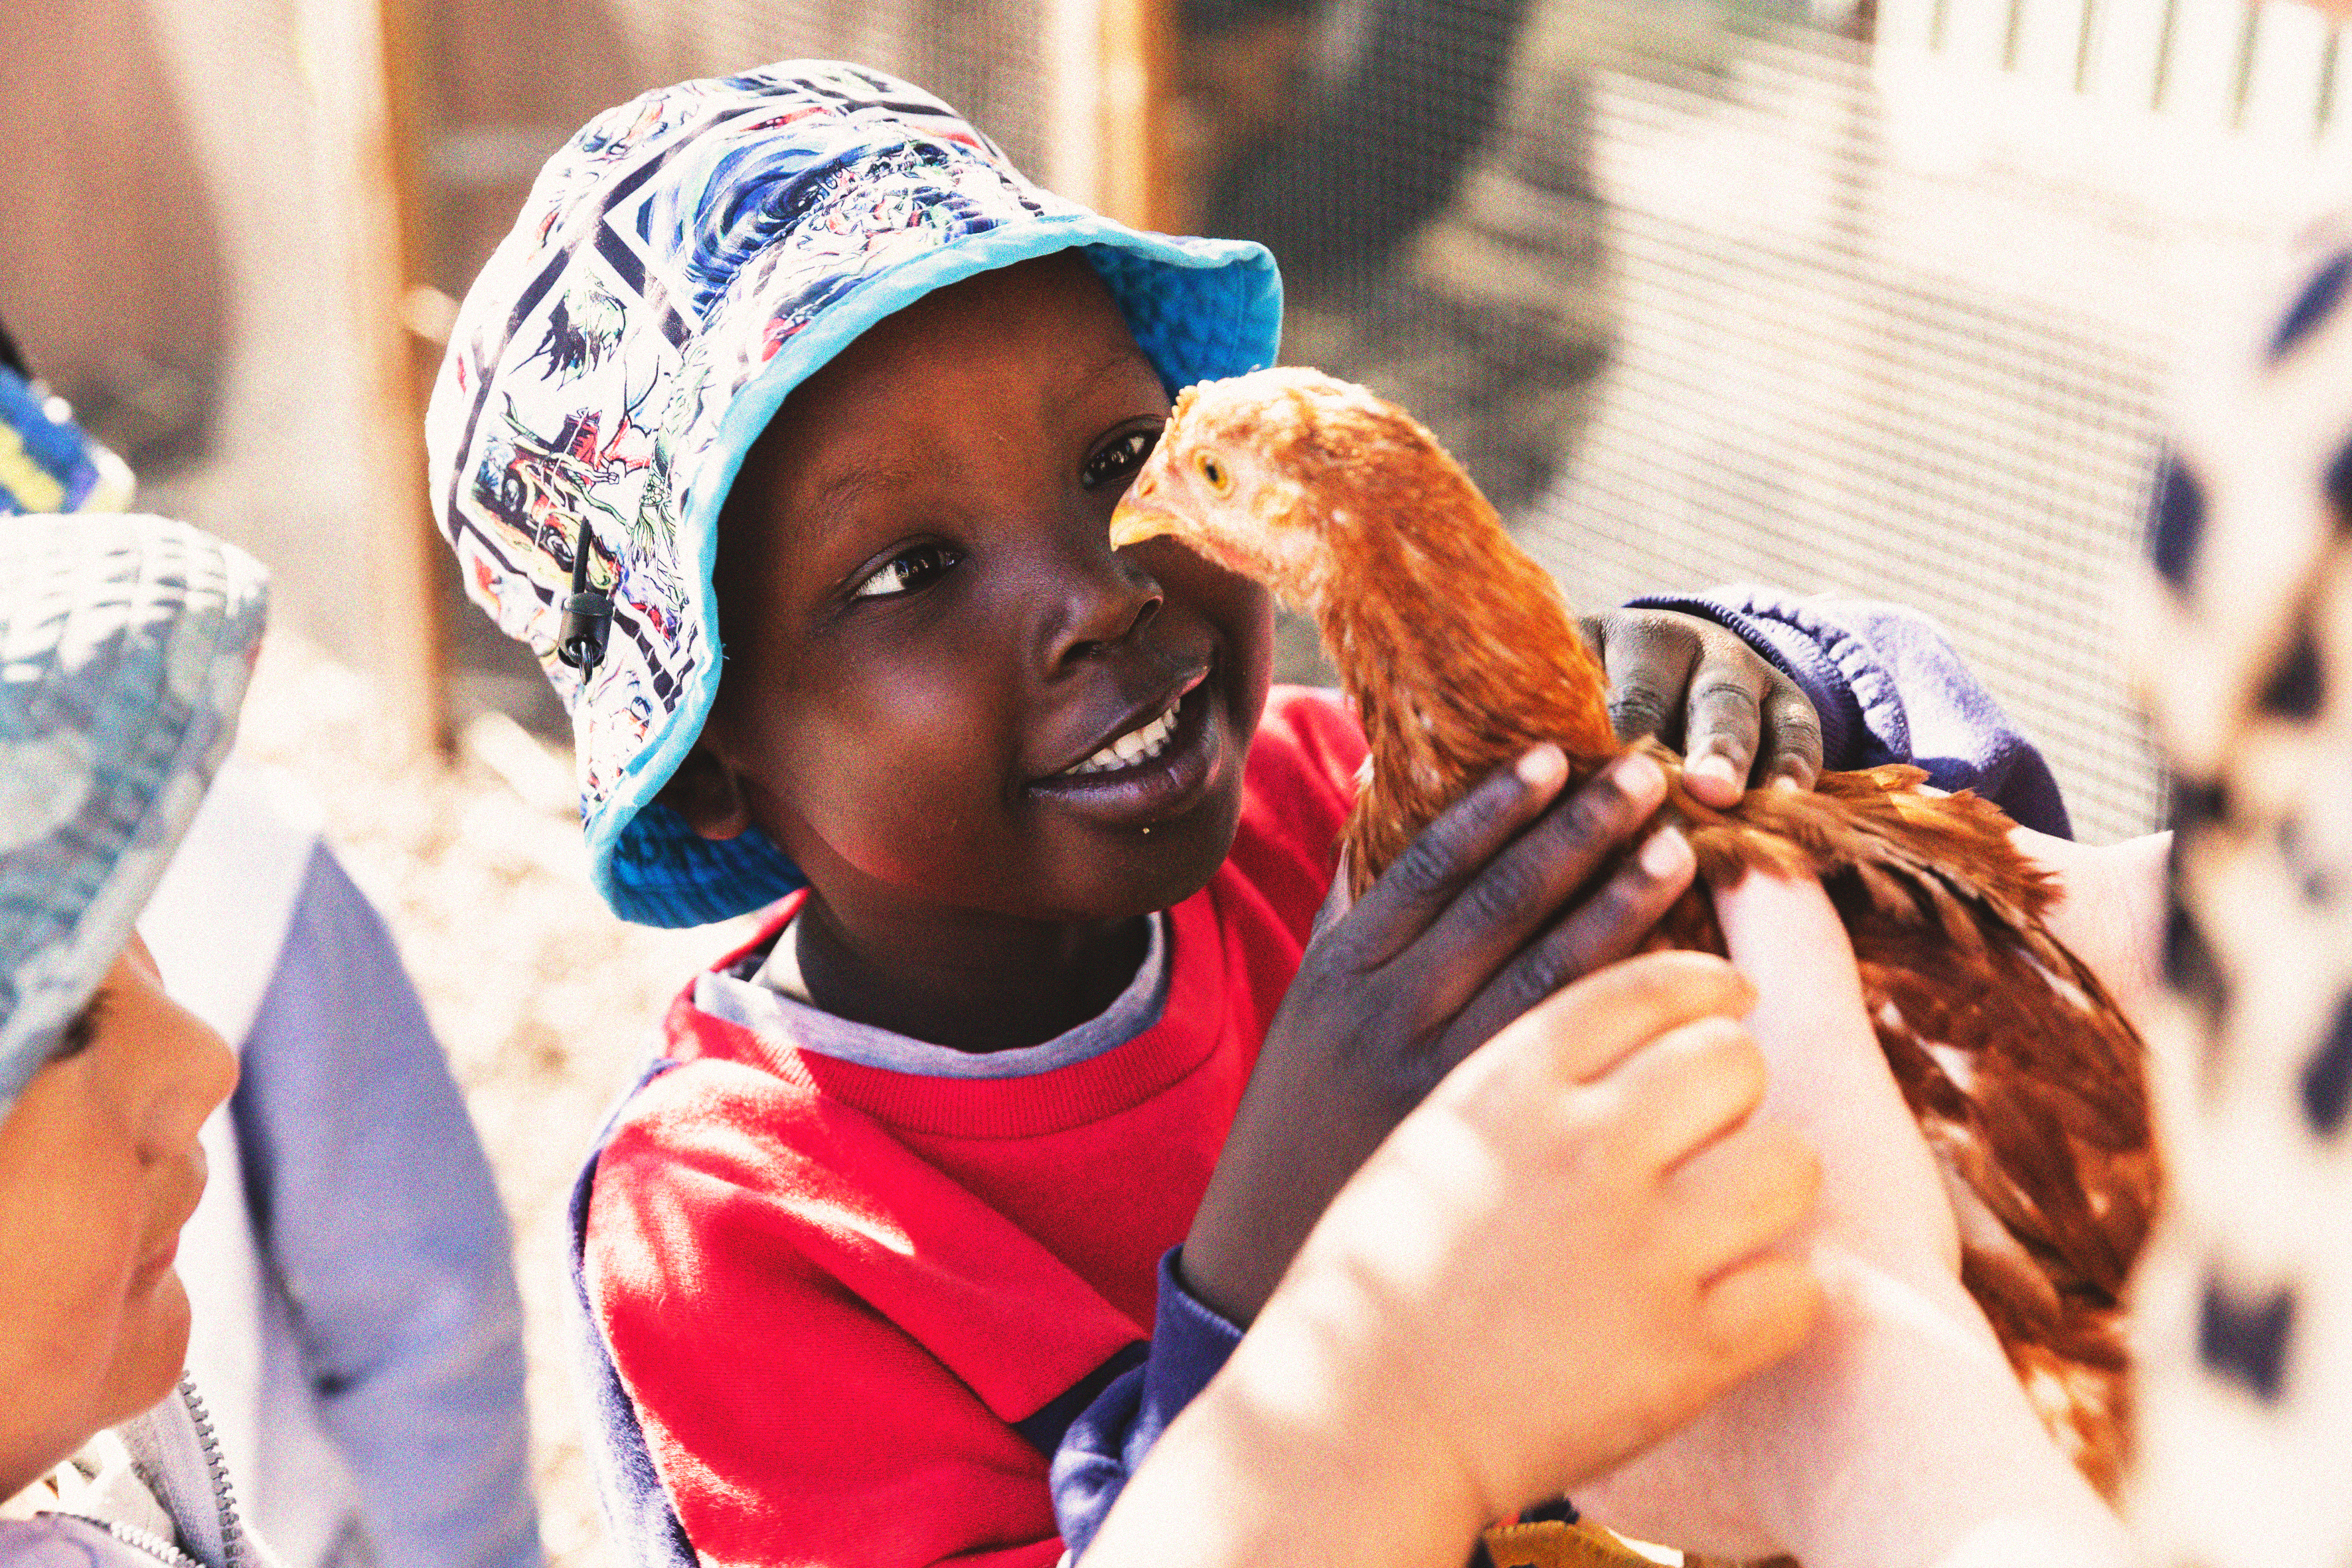 A young boy holding a chicken